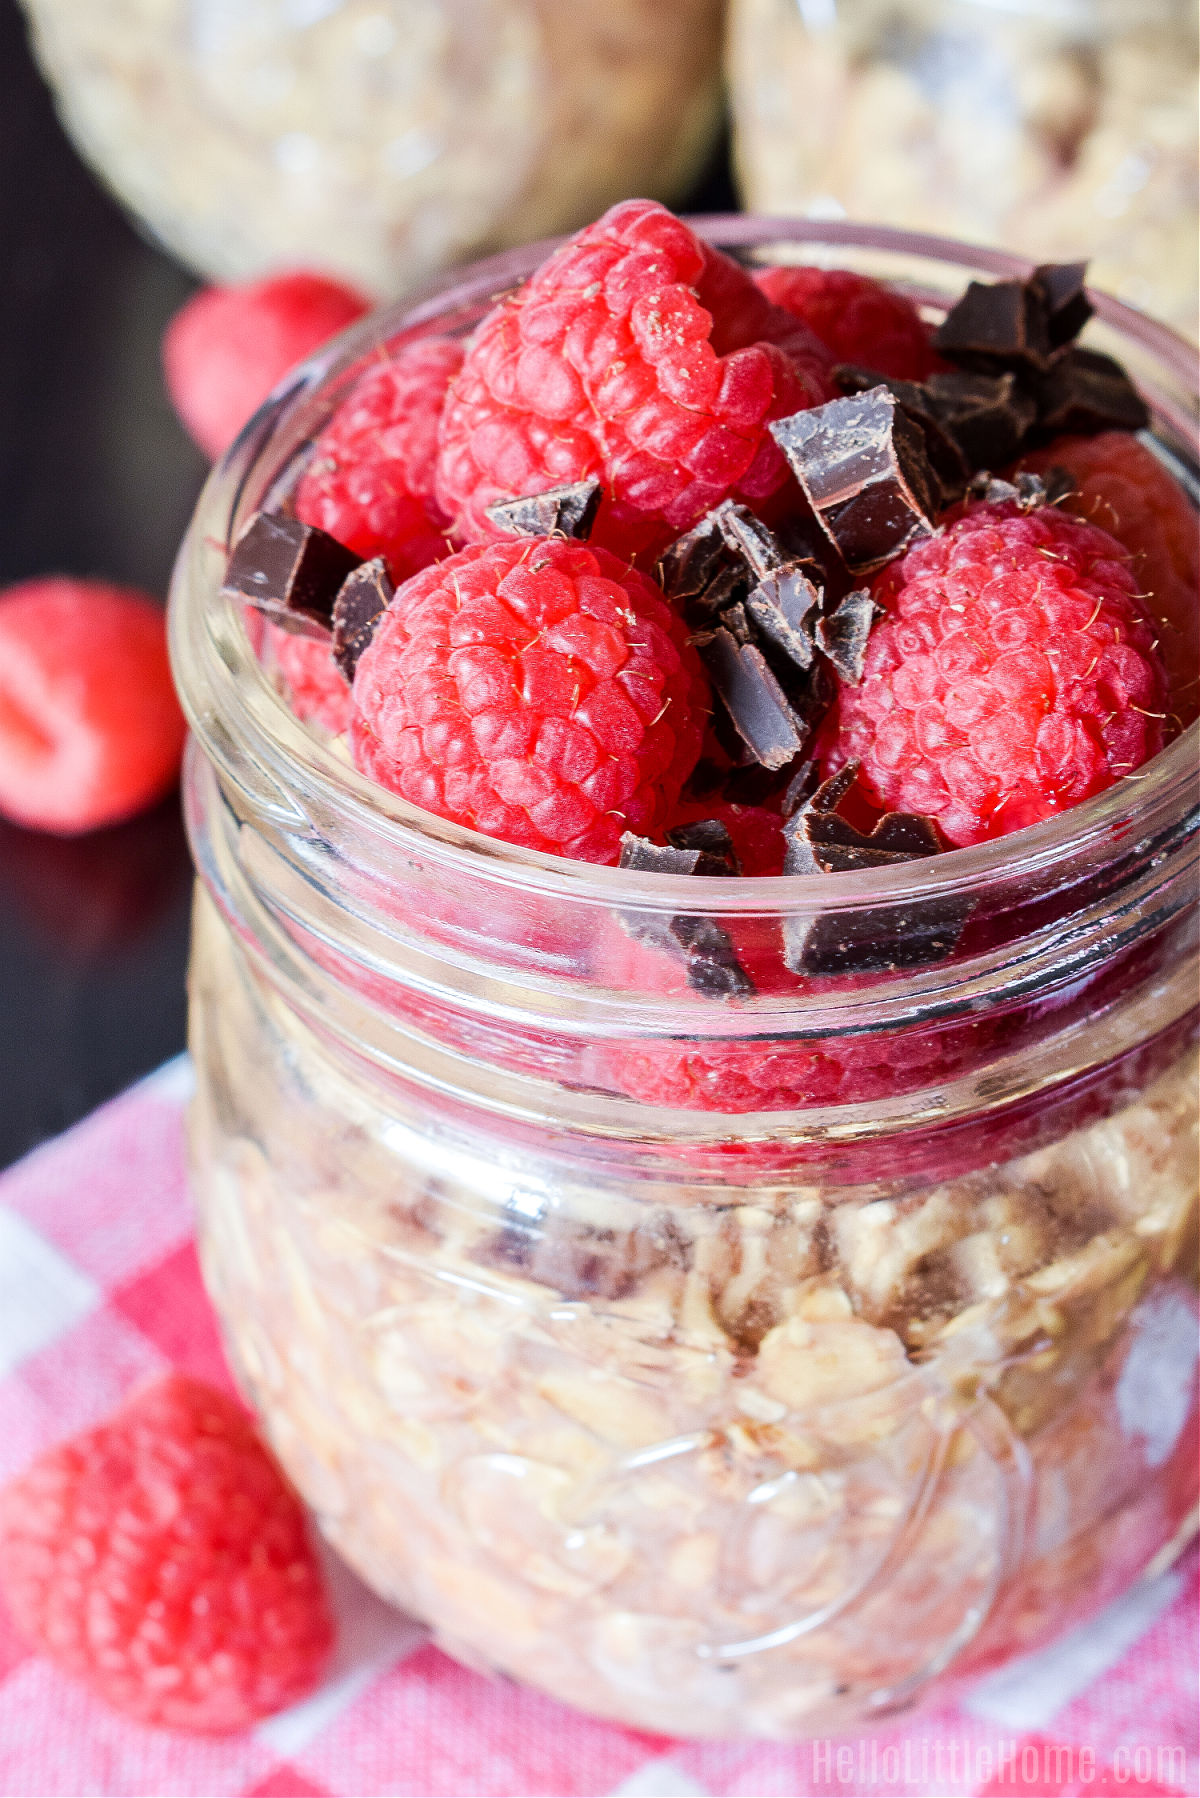 Closeup of the finished oats topped with fresh berries and chocolate chunks.